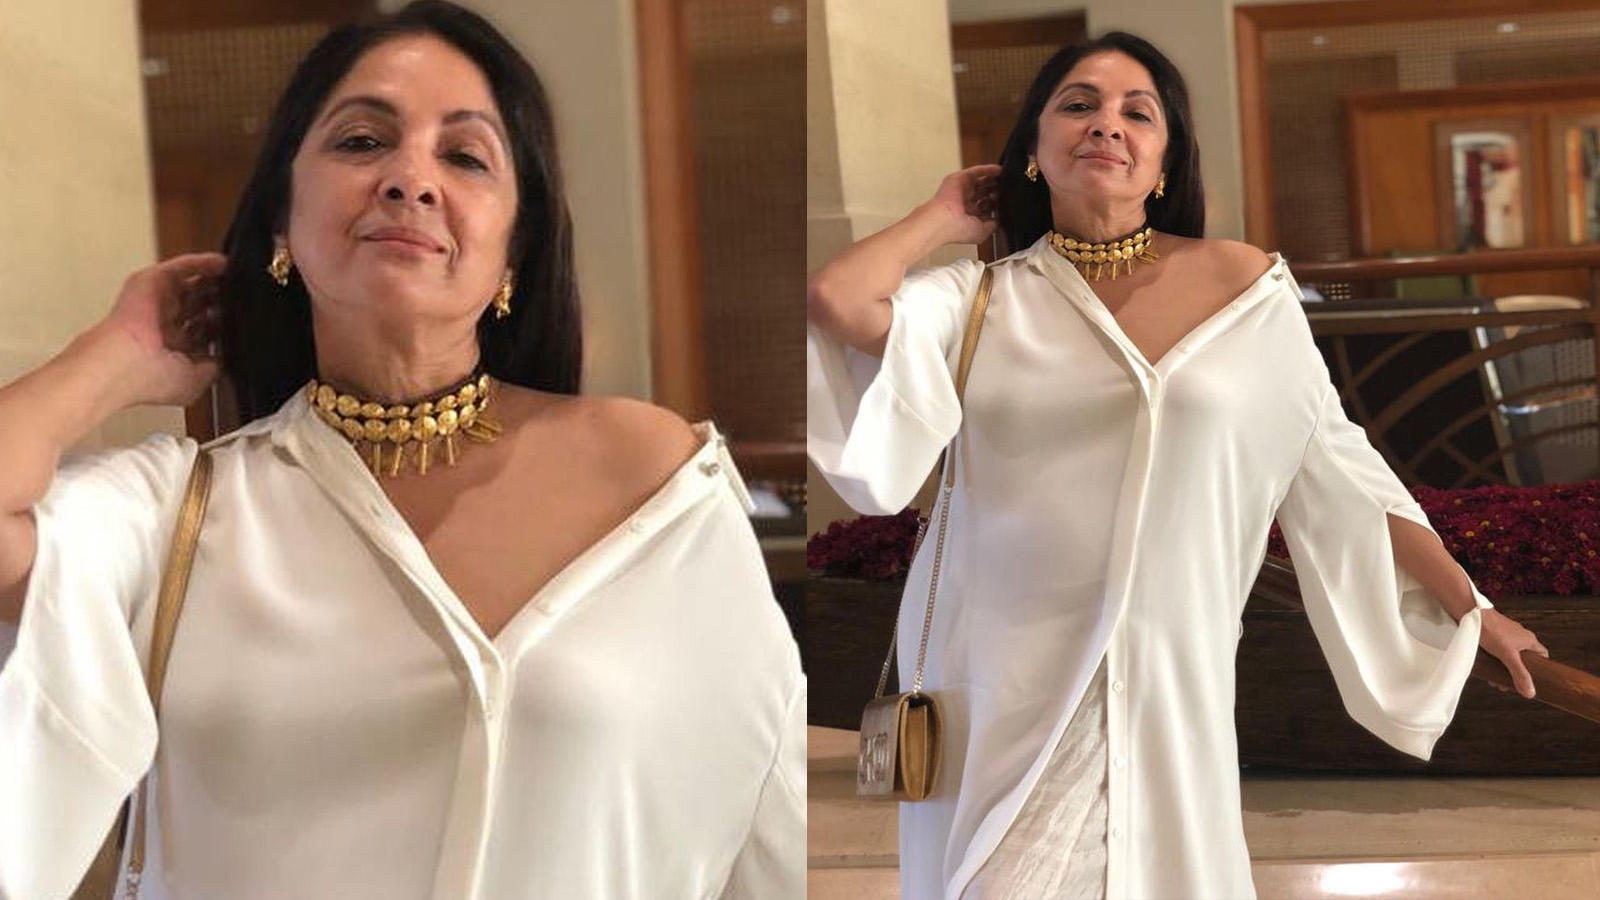 My hot pictures get a lot of likes, says Neena Gupta